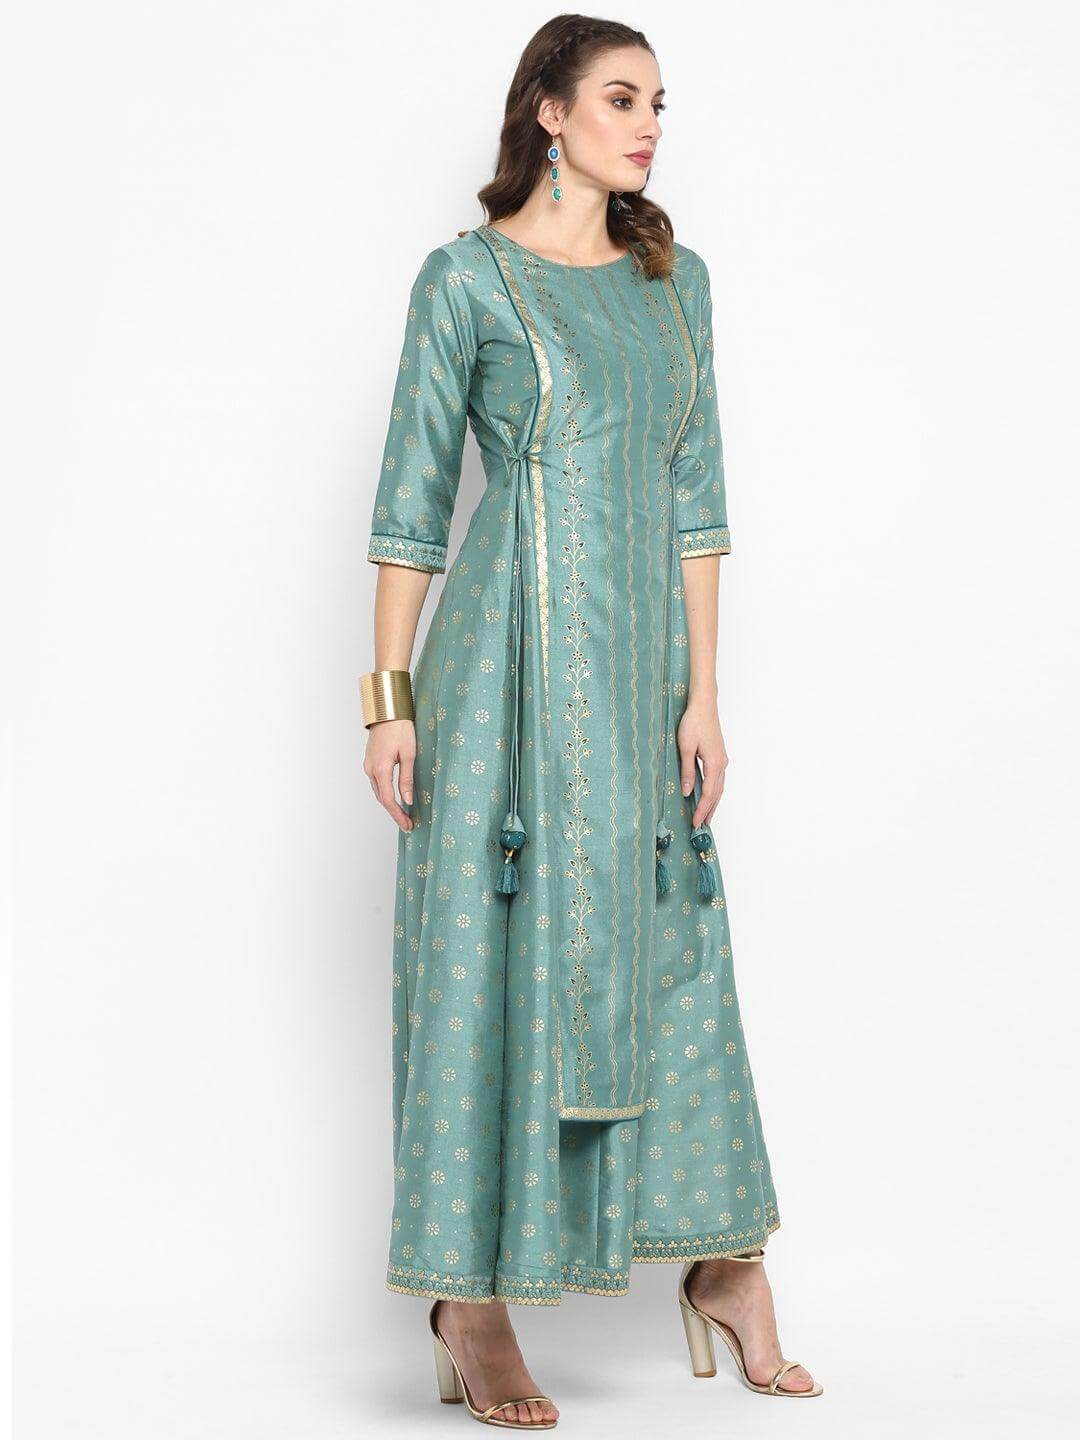 Ethnic Gowns | Gorgeous Dark Green Ethnic Gown | Freeup